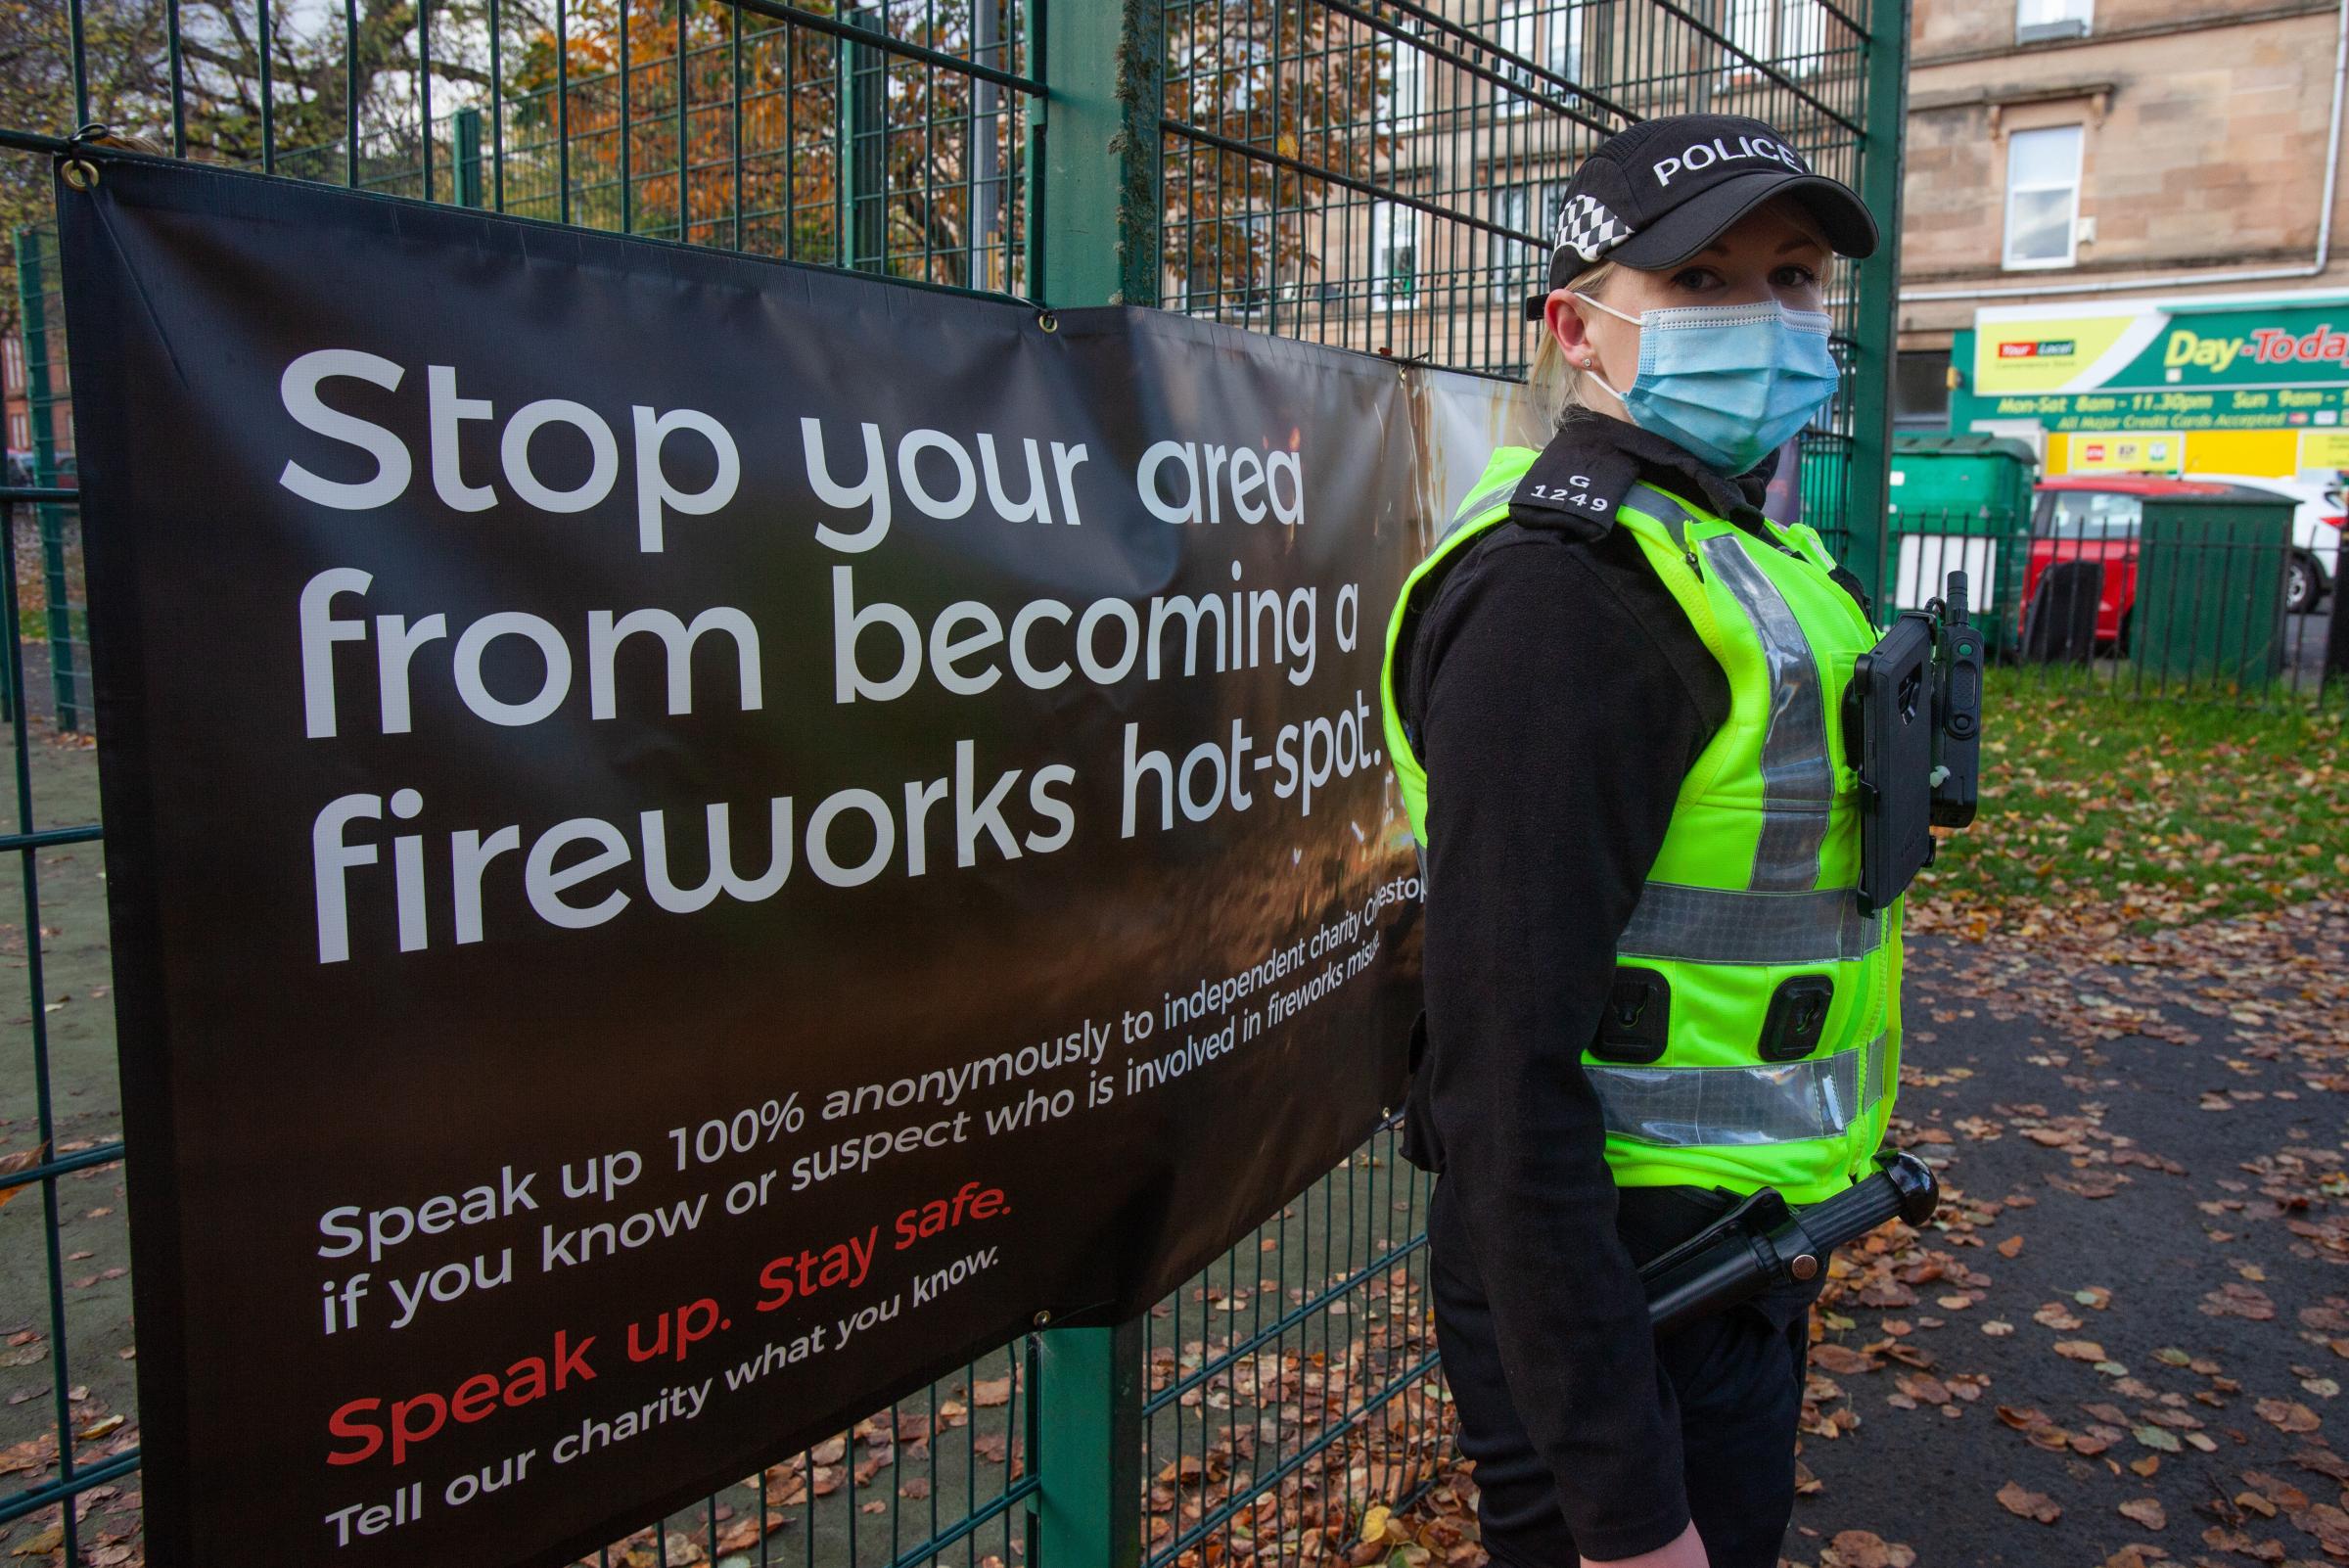 Scottish Government launches consultation on fireworks use after scenes in Glasgow